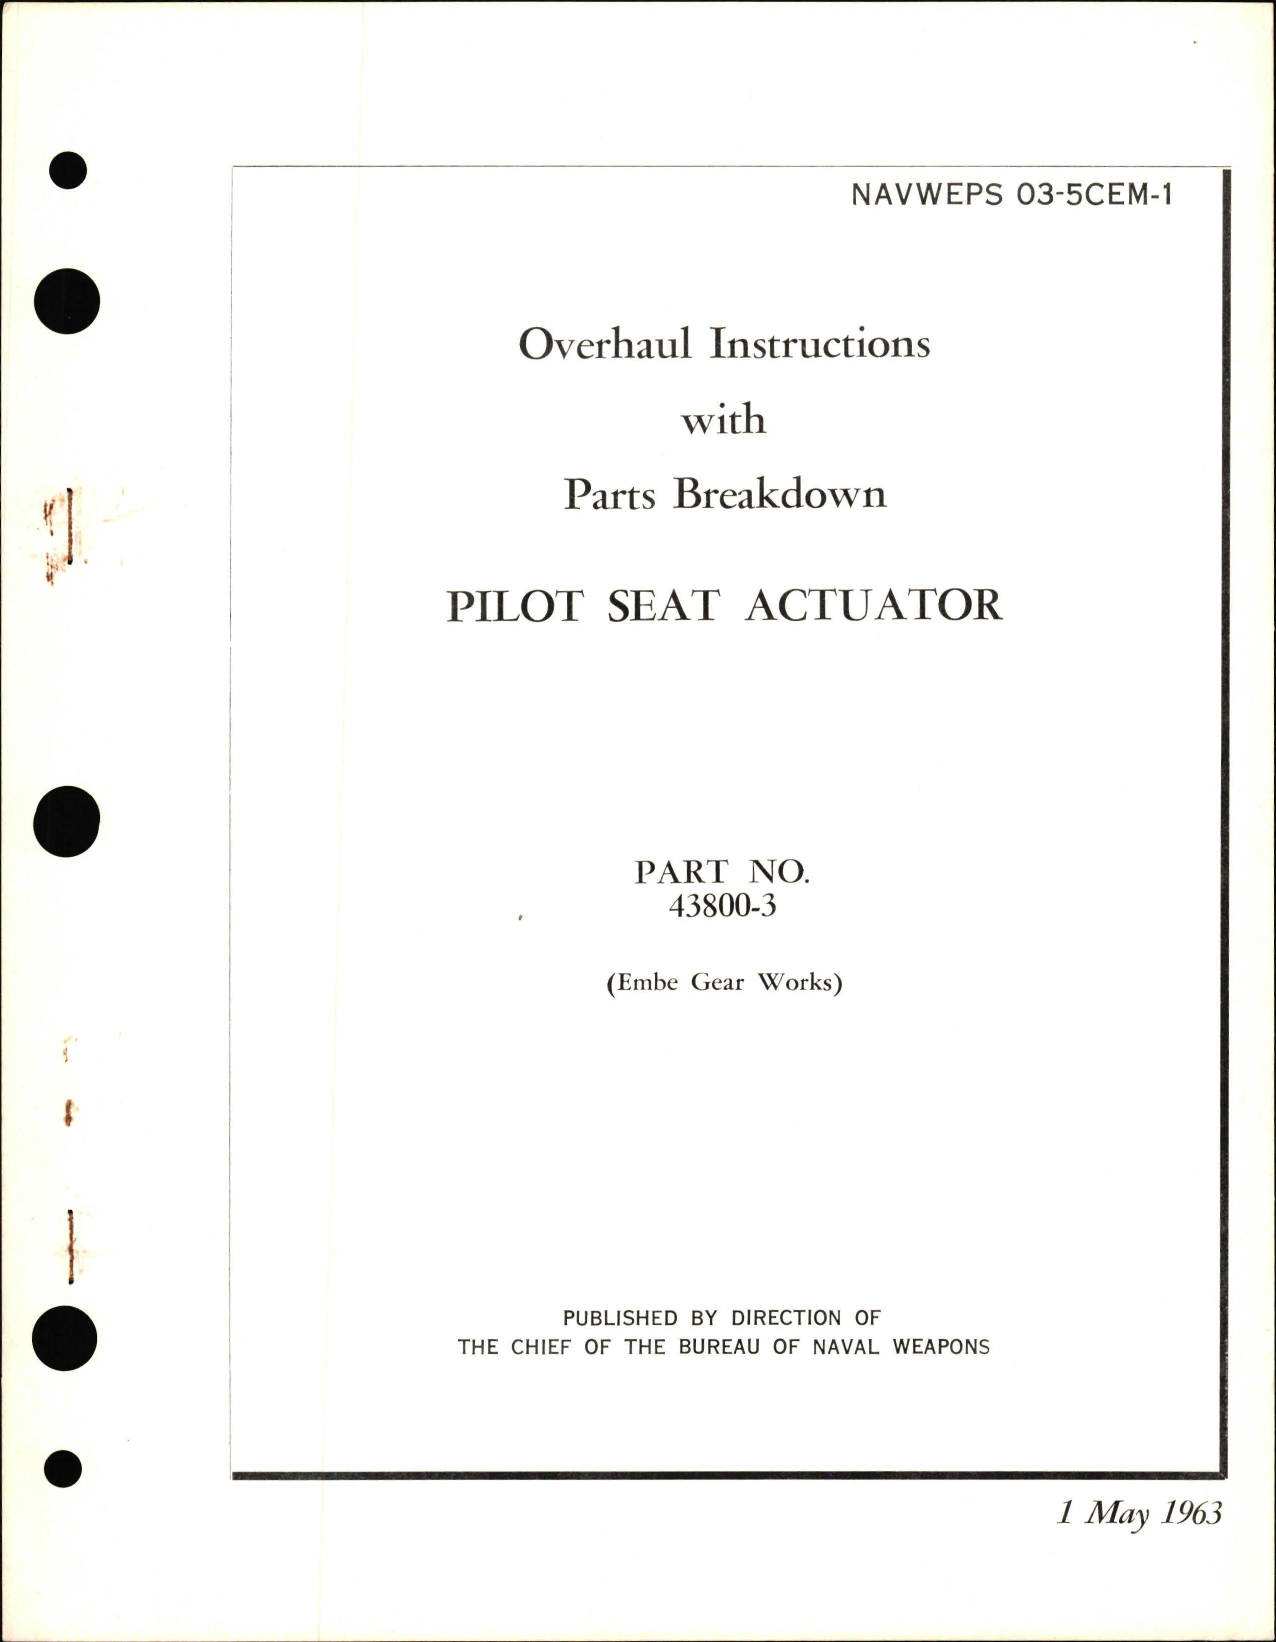 Sample page 1 from AirCorps Library document: Overhaul Instructions with Parts Breakdown for Pilot Seat Actuator - Part 43800-3 